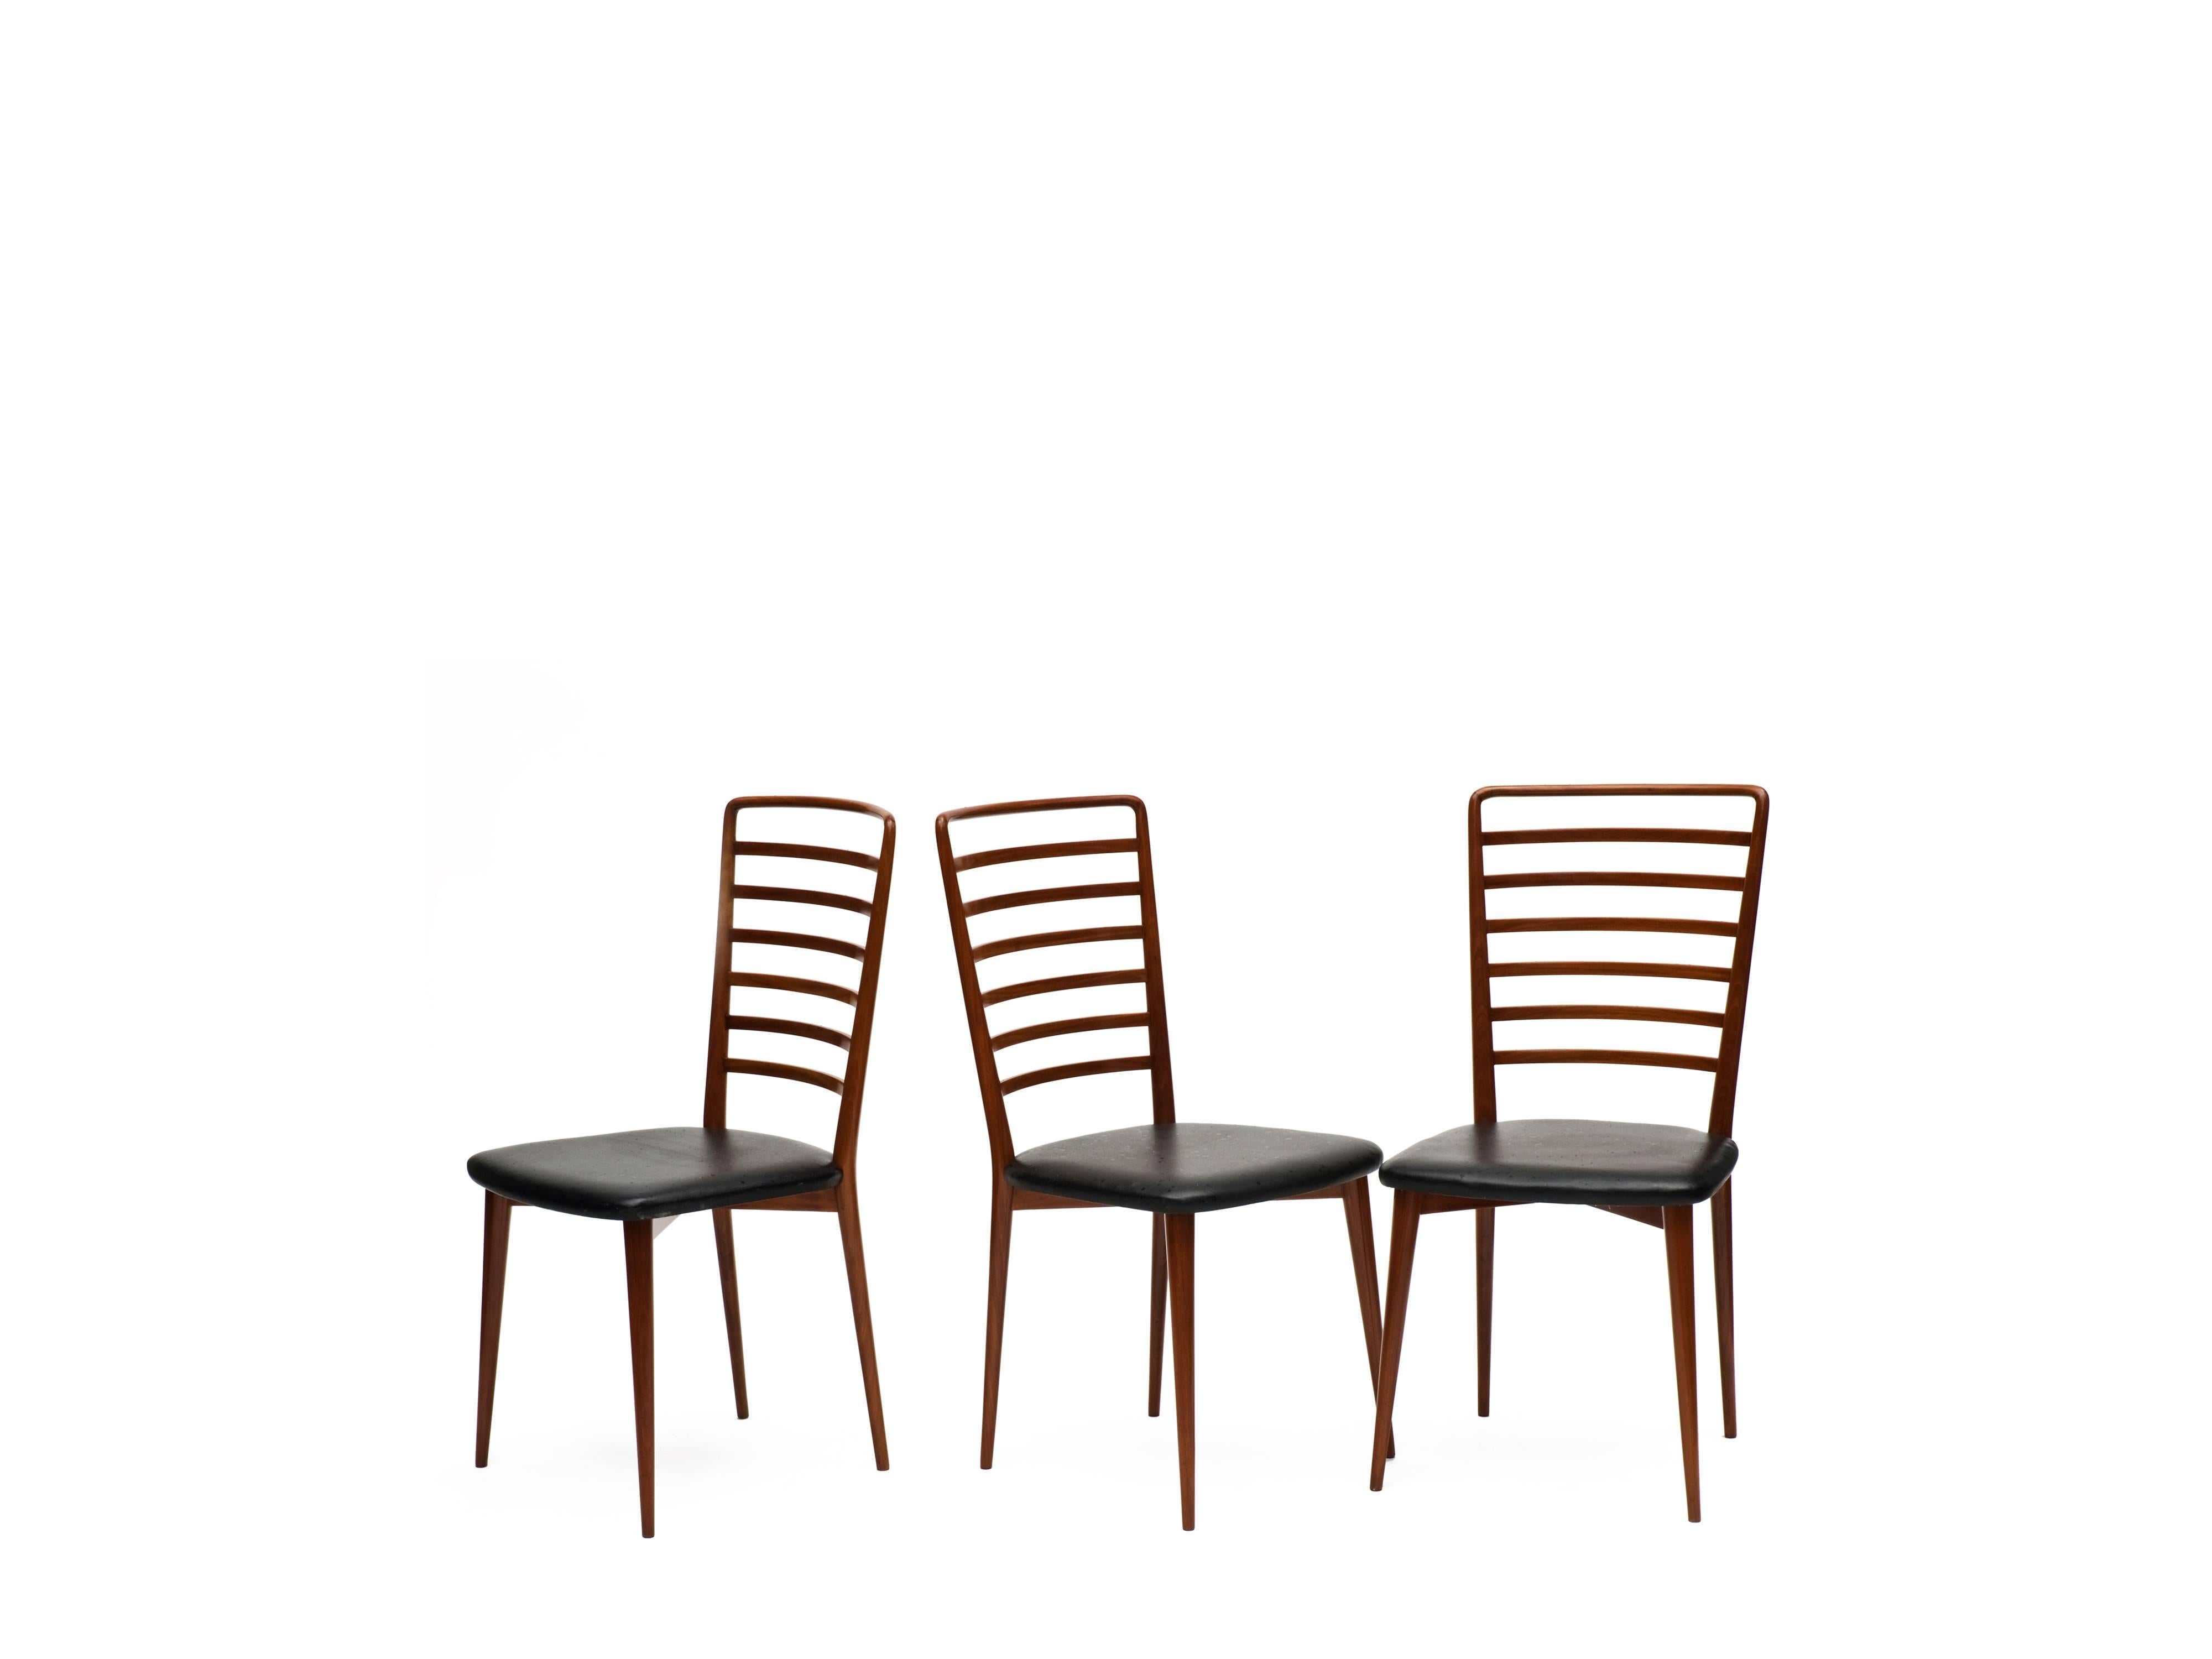 Set of six Midcentury brazilian Chairs in Perobinha do Campo by Joaquim Tenreiro, 50s

Designed by the master wood Joaquim Tenreiro in the 1950s, it has all its structure in Brazilian wood Perobinha do Campo. Its back is joined by strips of wood